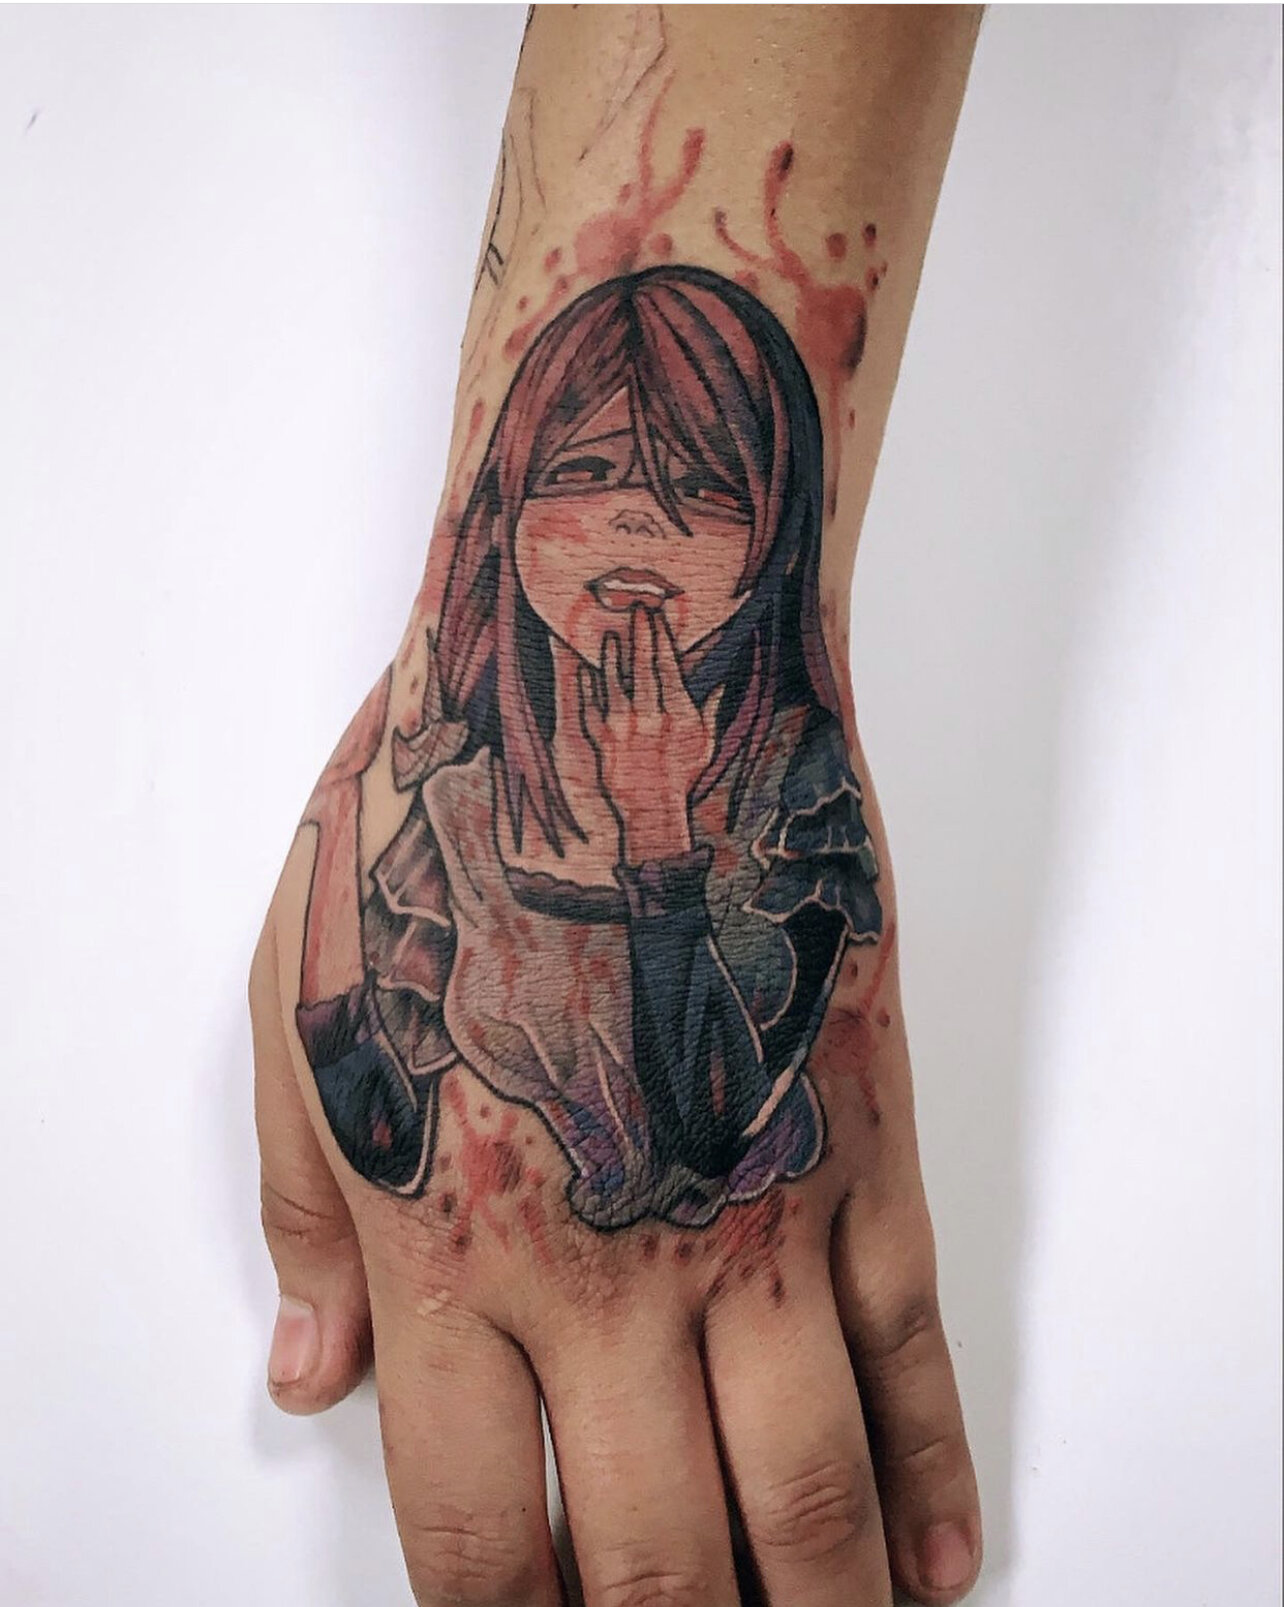 11 Matching Anime Tattoos That Will Blow Your Mind  alexie